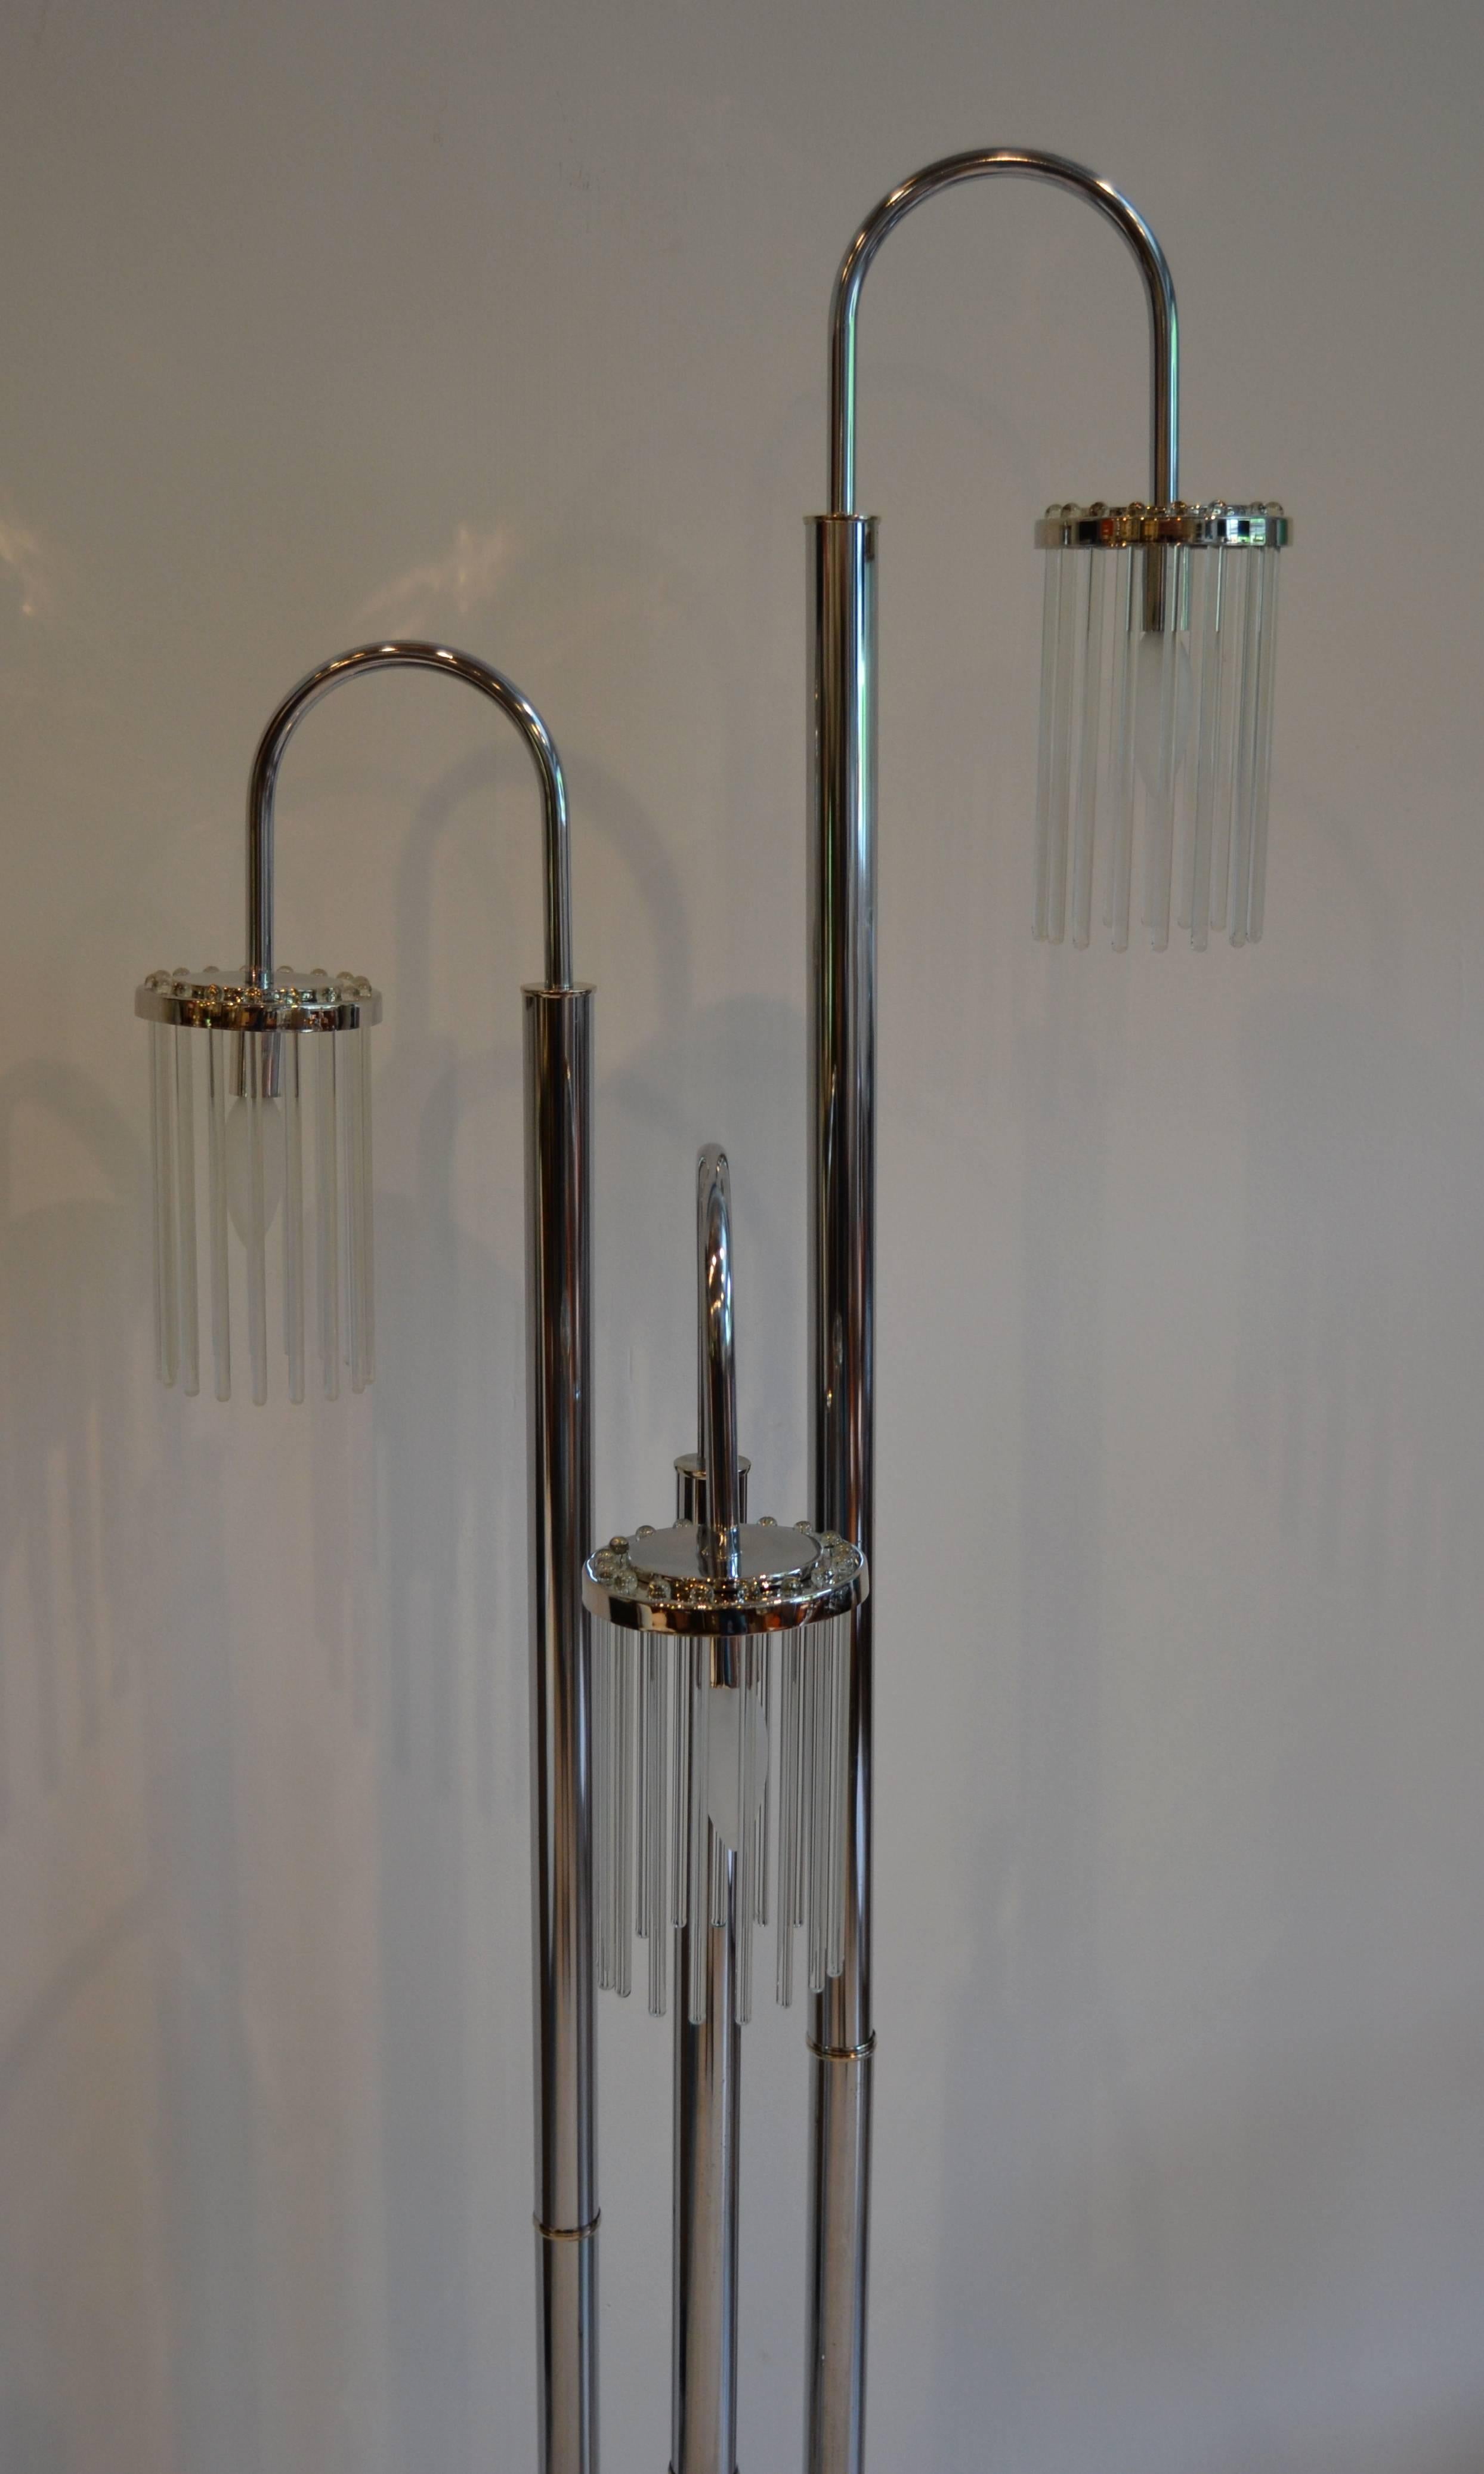 Outstanding Mid Century Gaetano Sciolari for Lightolier glass rod and chrome floor lamp. Waterfall series. Extremely rare. Expertly restored and rewired, circa 1970s.